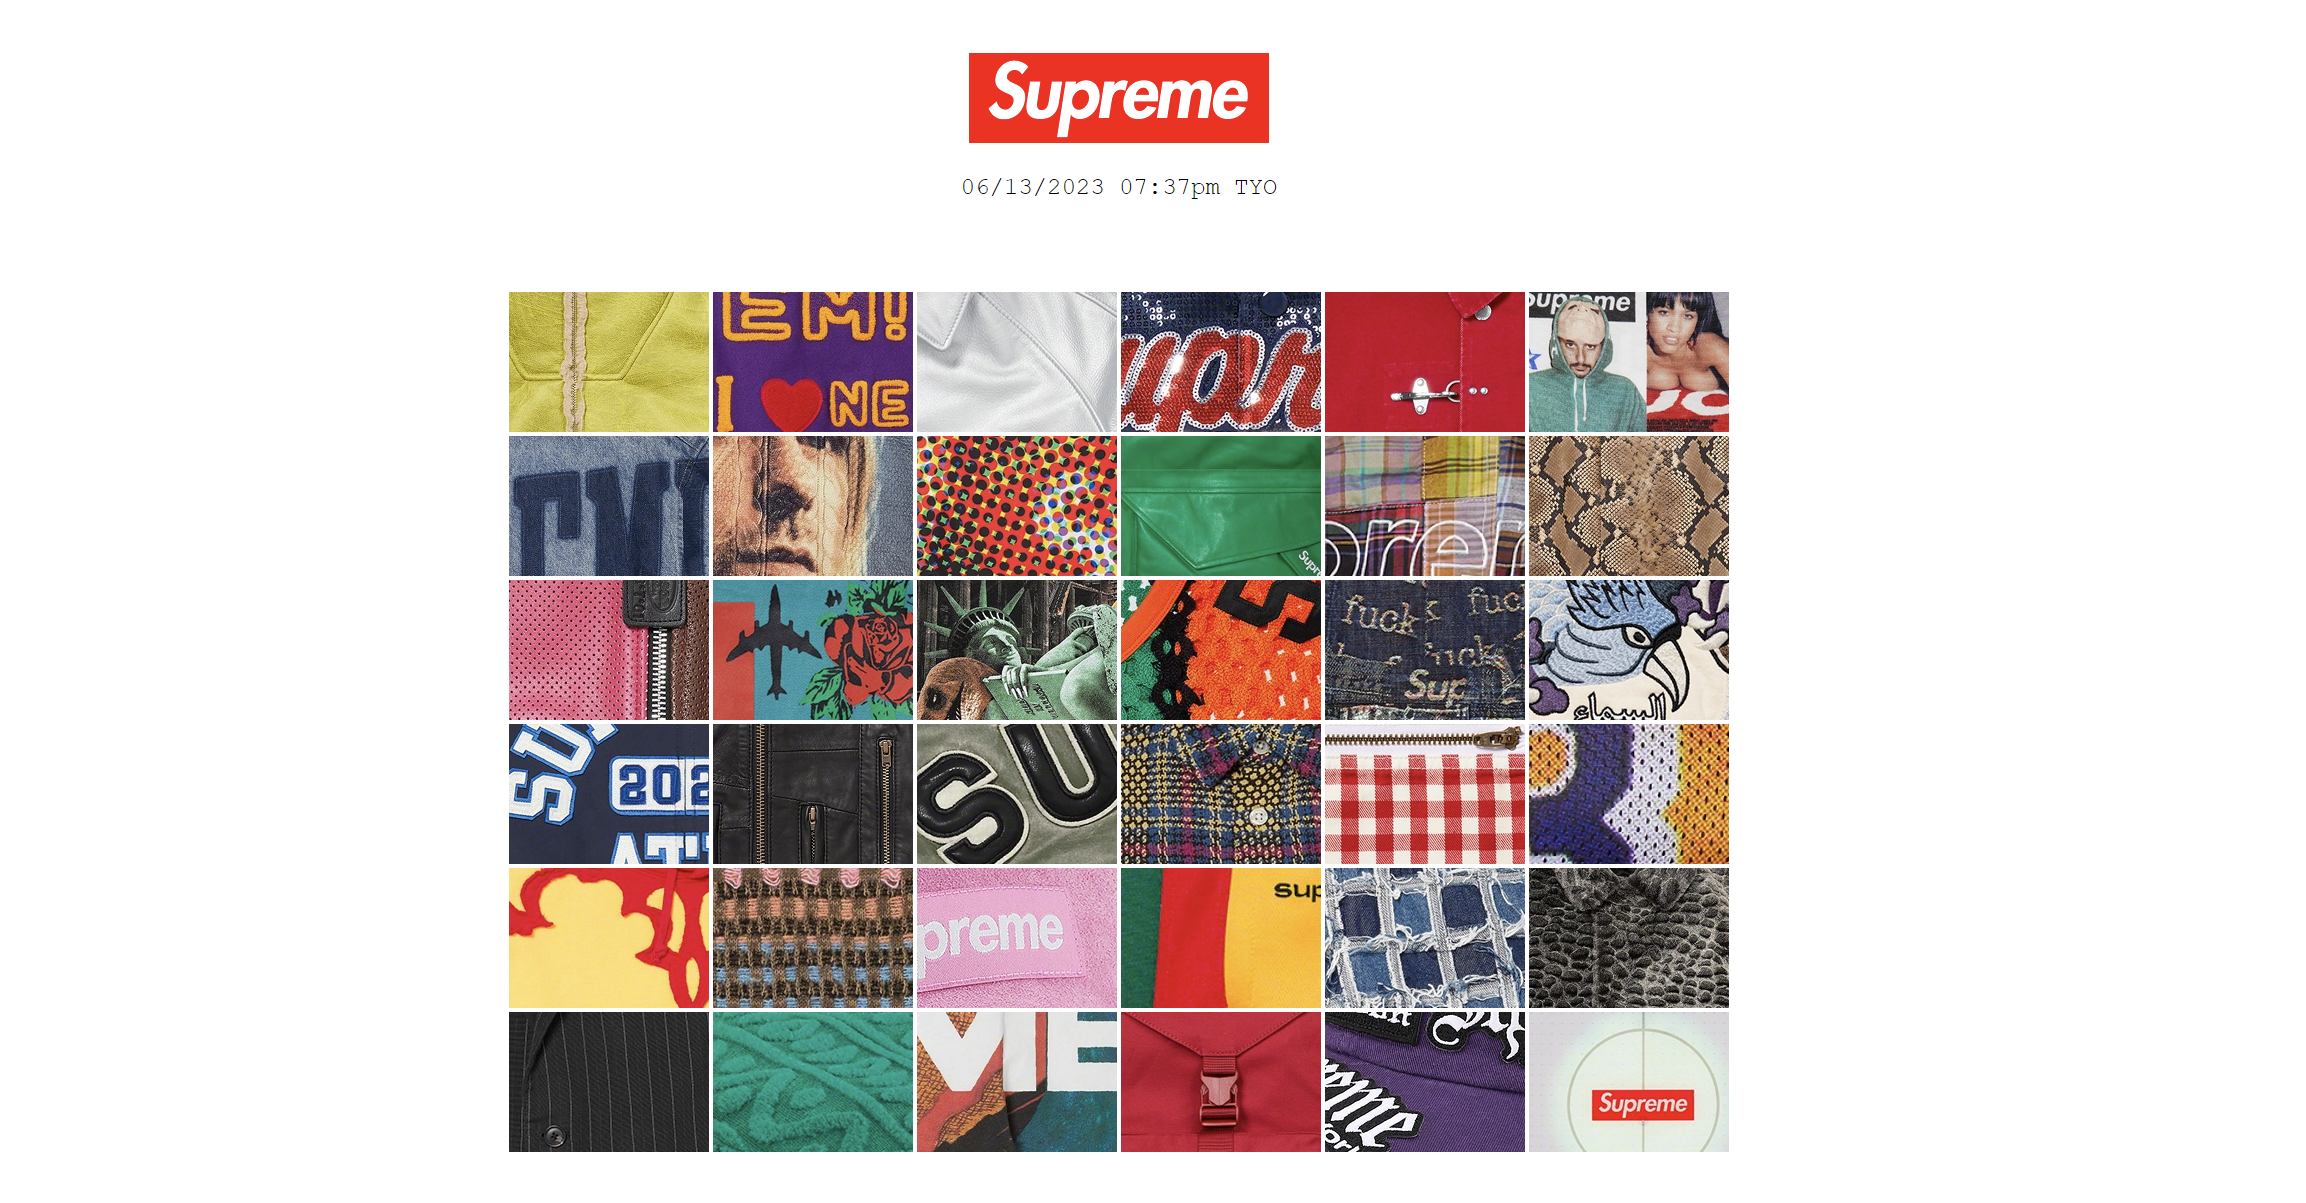 Supreme’s Financial Data Revealed: $520M Annual Revenue from 15 Stores and Website